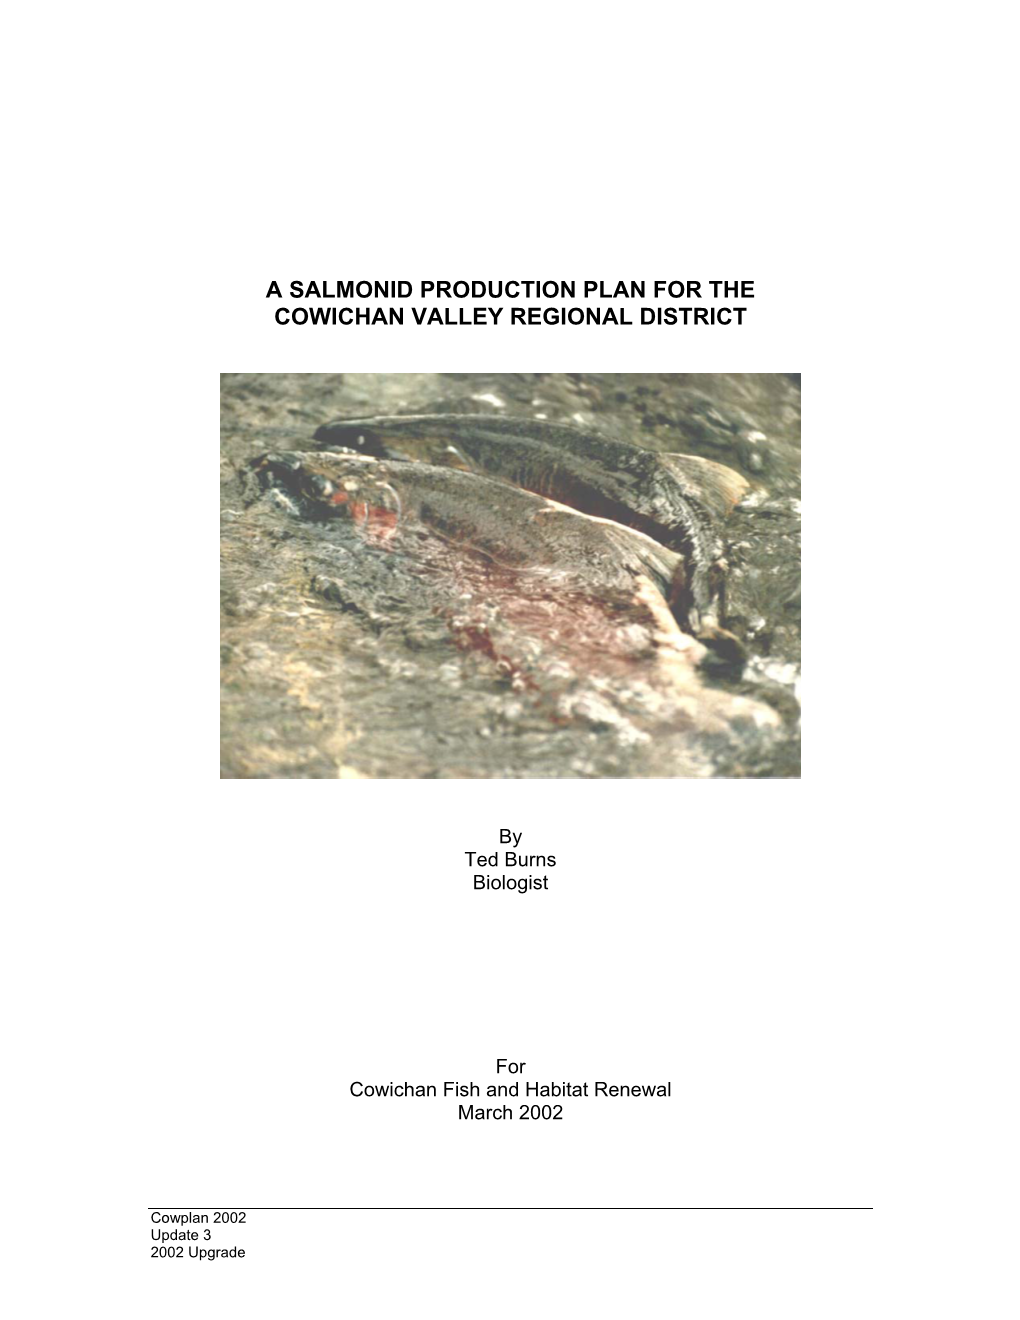 A Salmonid Production Plan for the Cowichan Valley Regional District